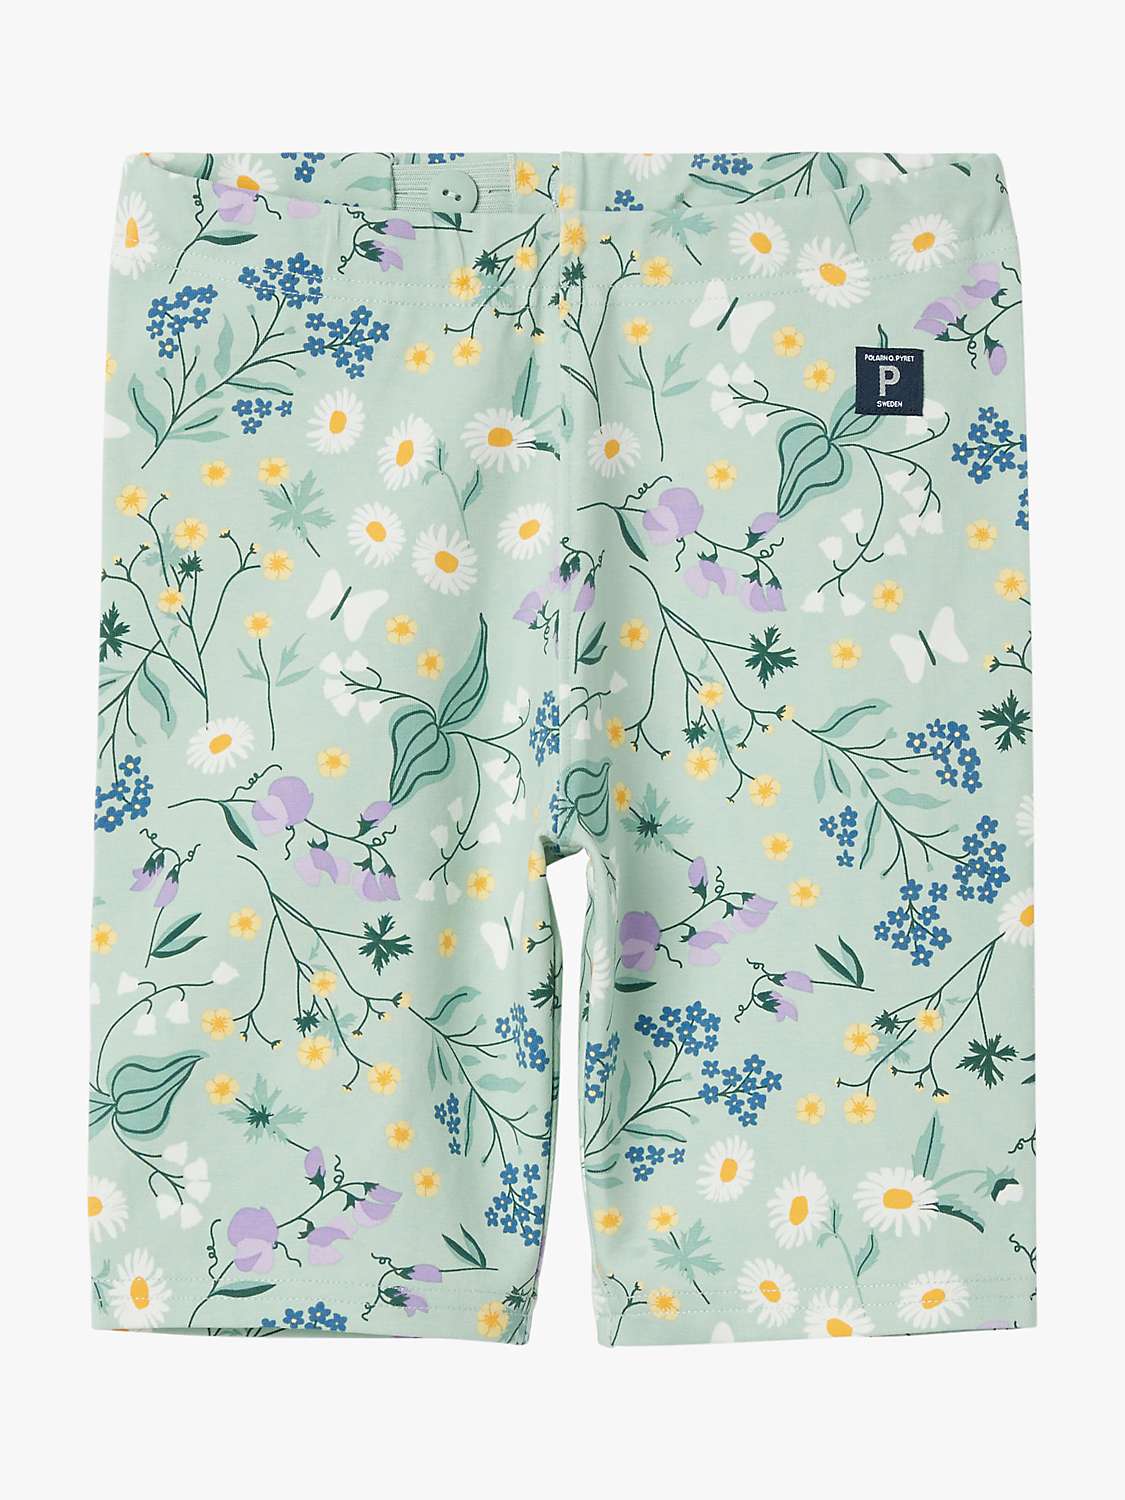 Buy Polarn O. Pyret Kids' Organic Floral Print Cycle Shorts, Duck Egg Blue Online at johnlewis.com